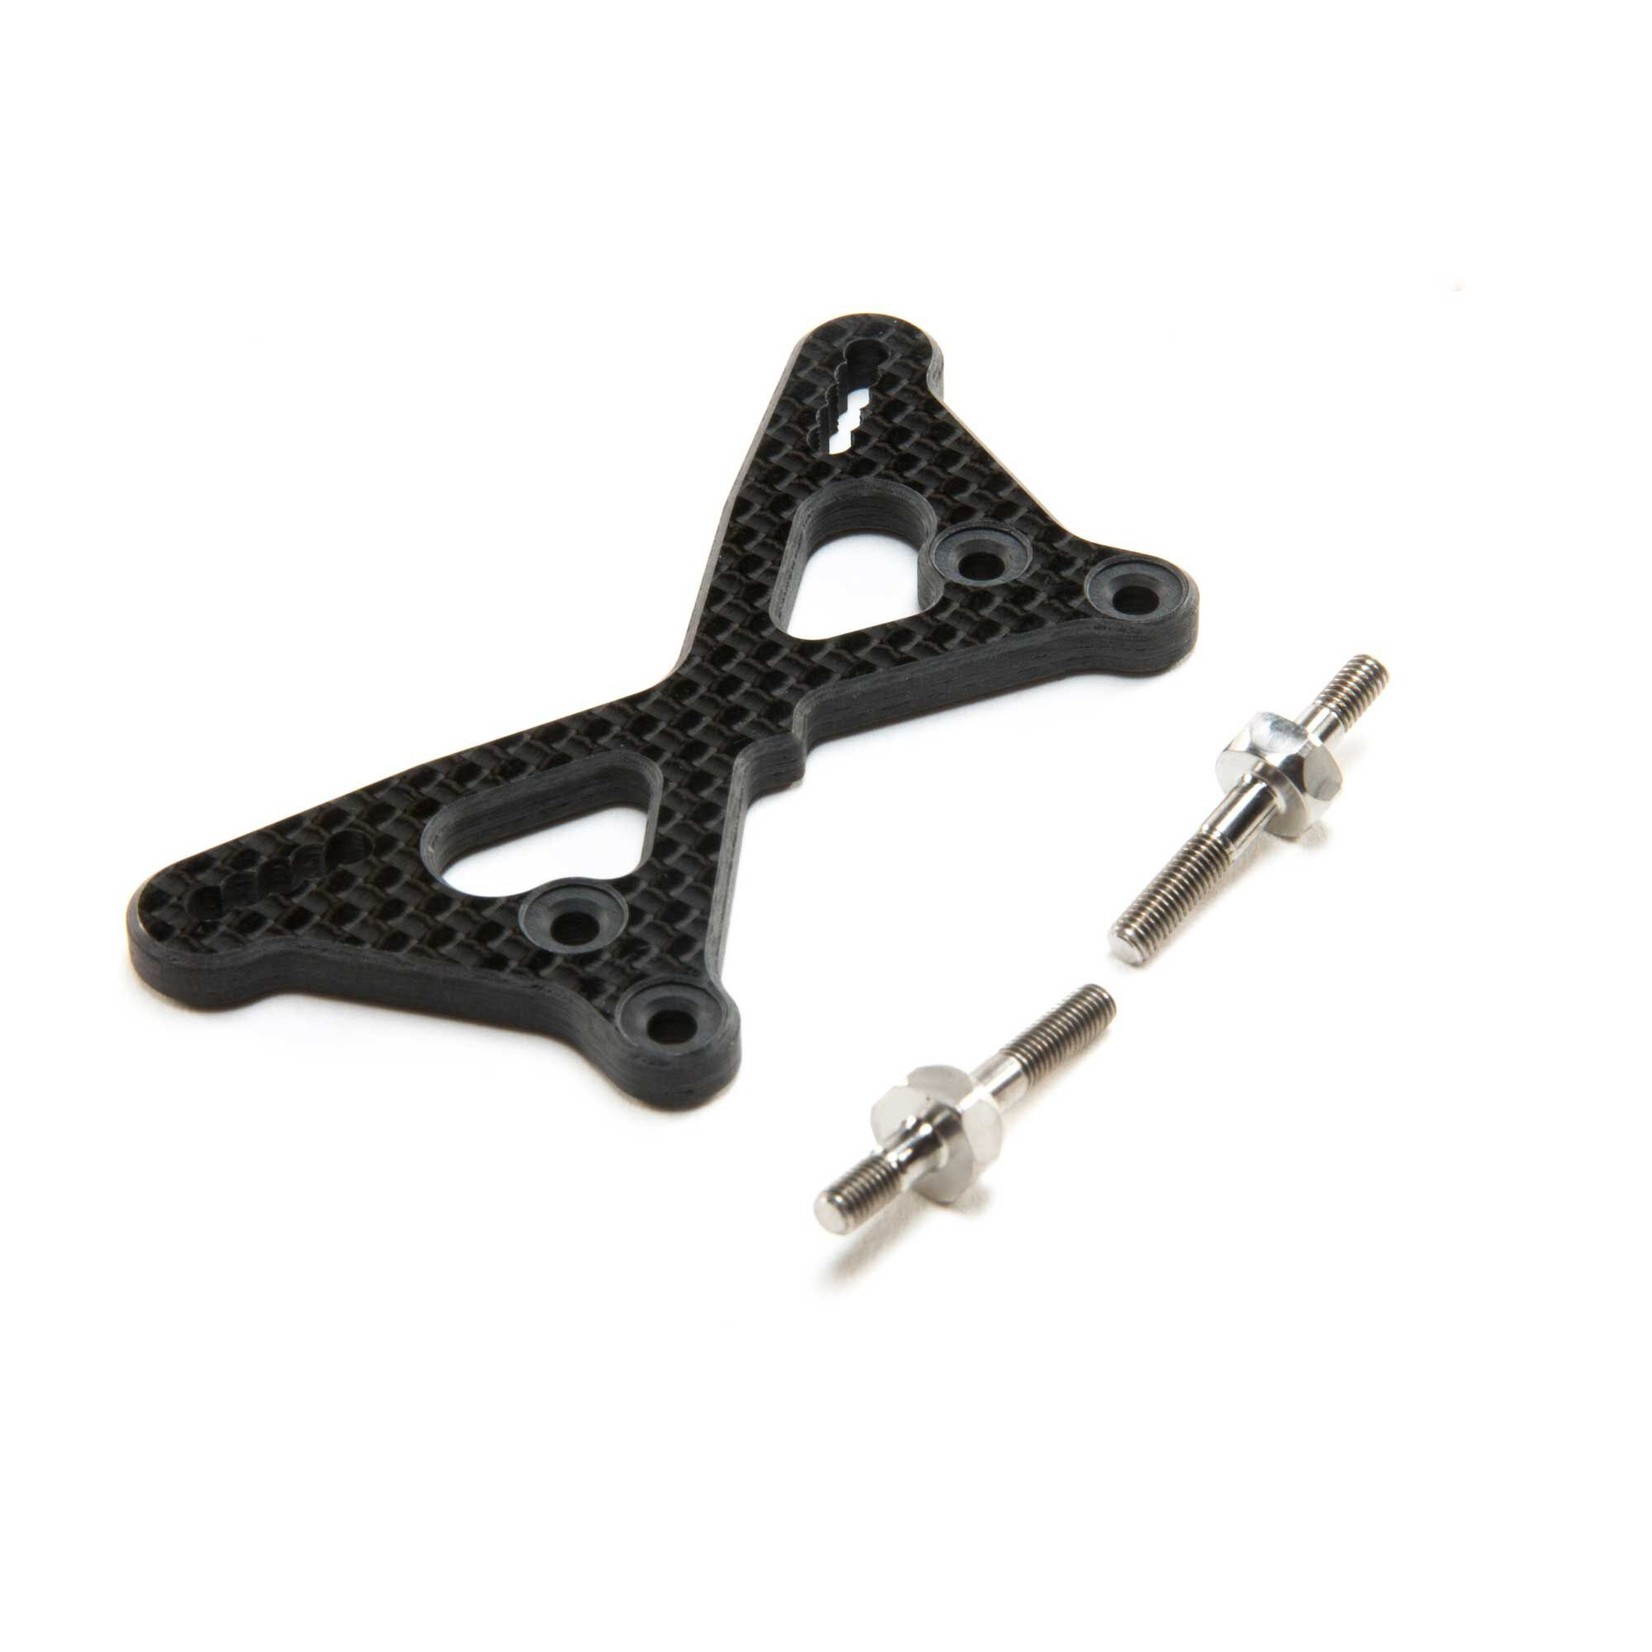 Team Losi Racing (TLR) Carbon Front Tower +2mm with Titanium Standoffs: 22 5.0